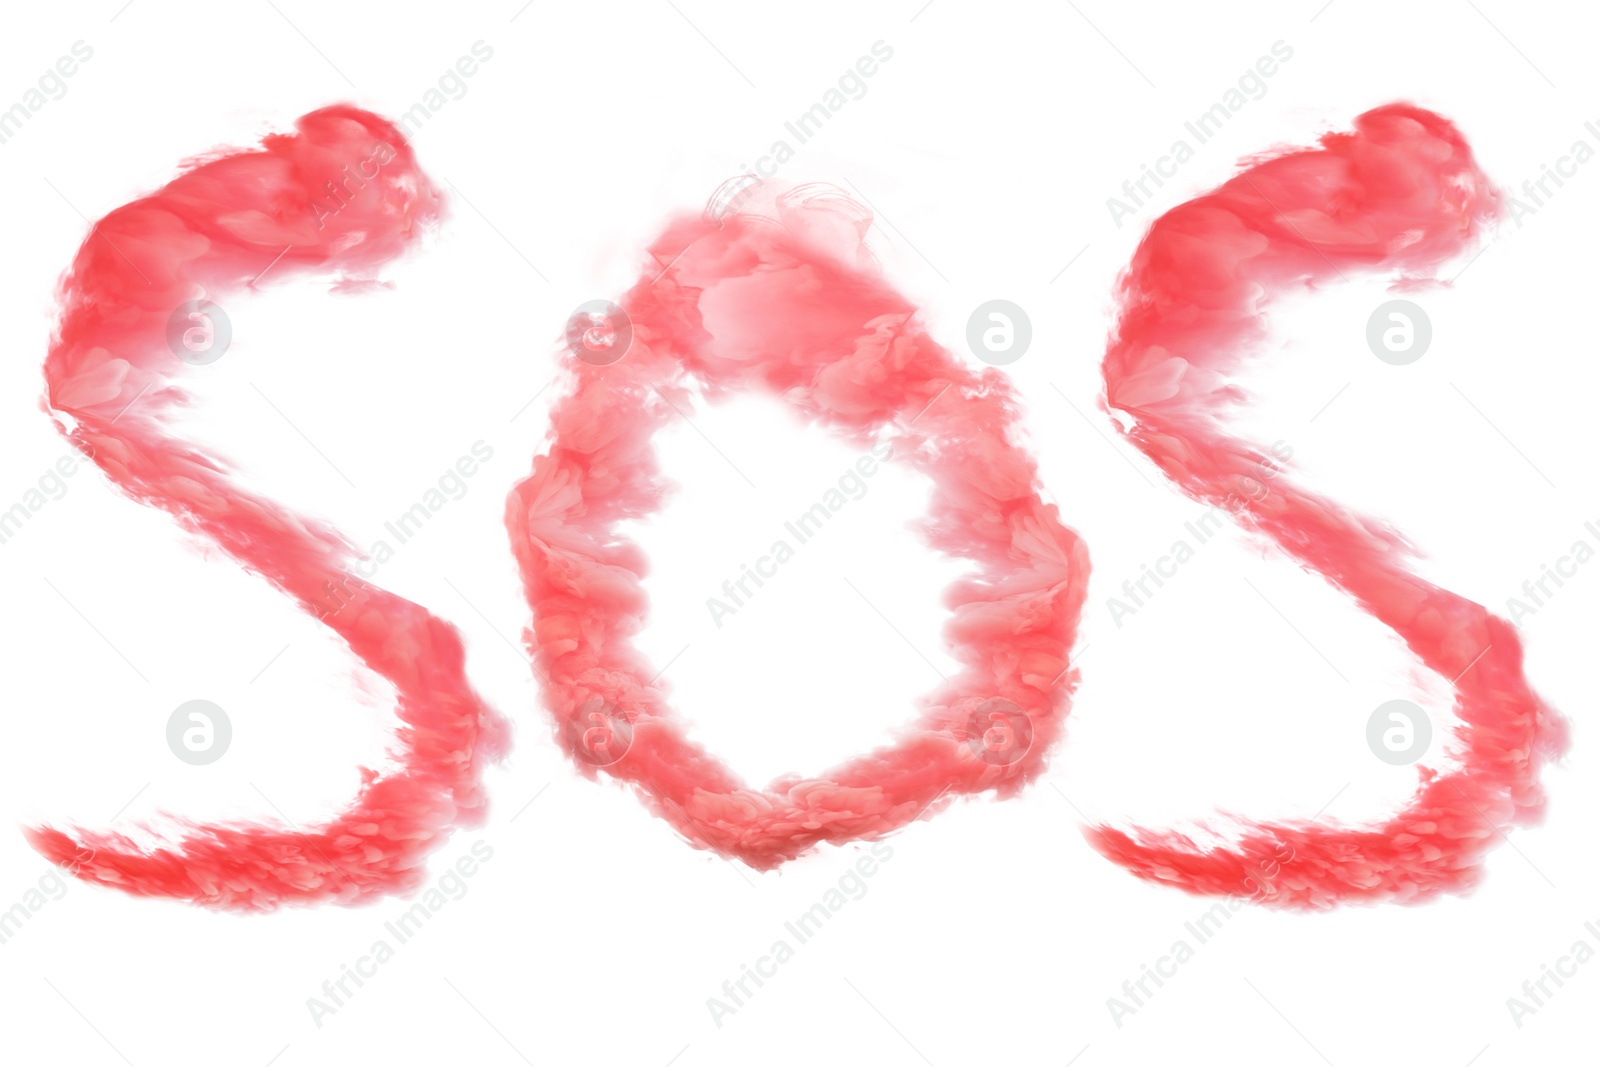 Image of Word SOS made of red smoke on white background